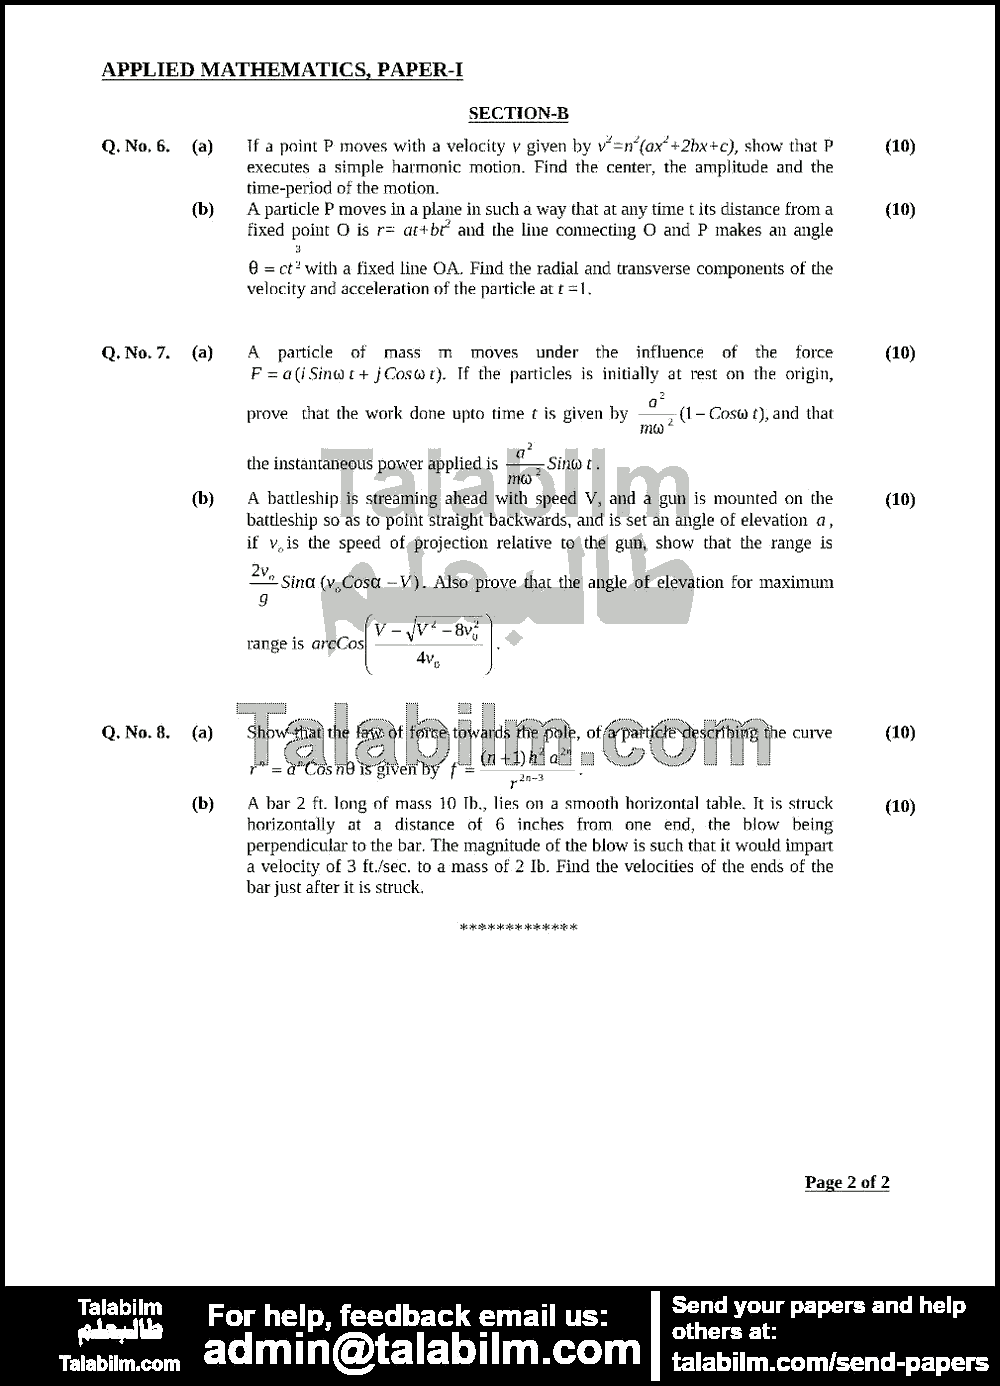 Applied Mathematics 0 past paper for 2014 Page No. 2